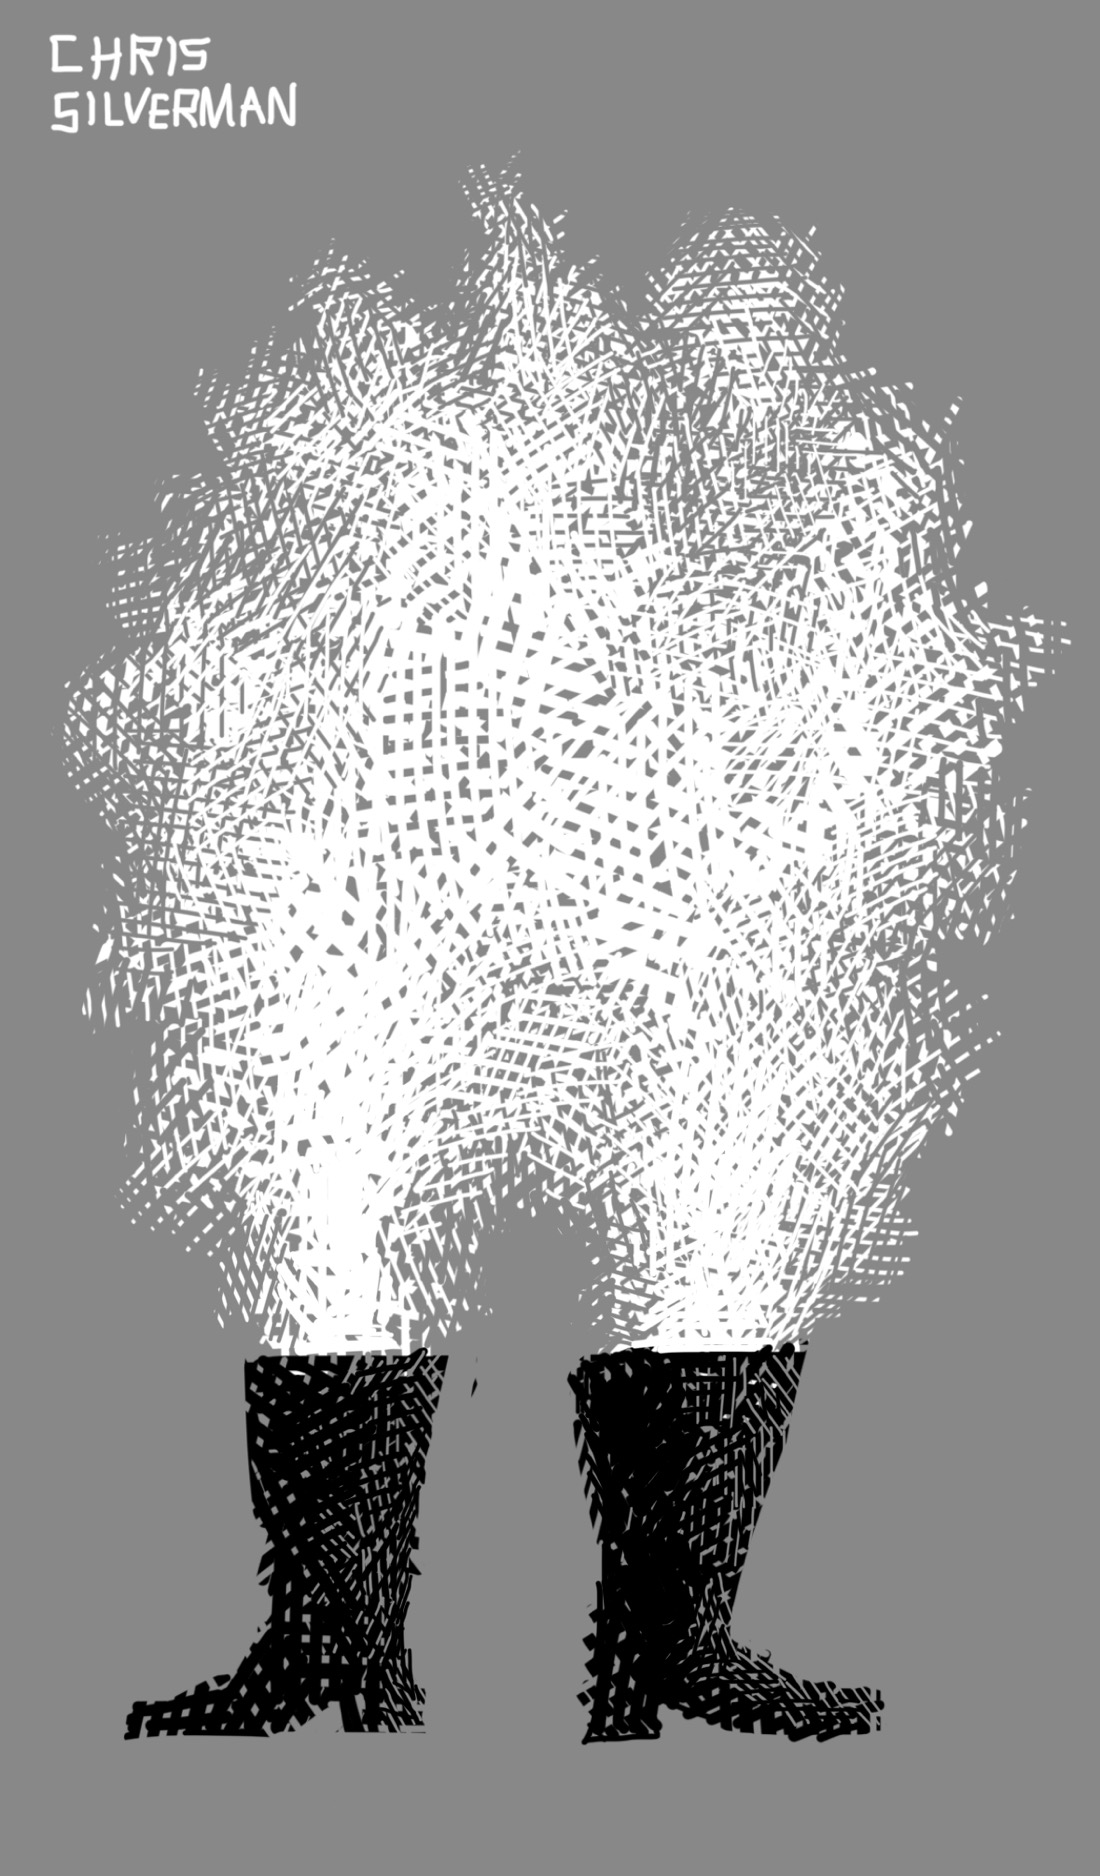 Two black rubber boots, positioned as though someone is standing in them, with steam rising out of each to form a large, amorphous cloud. The background of this drawing is gray; the boots are black; the steam is white.